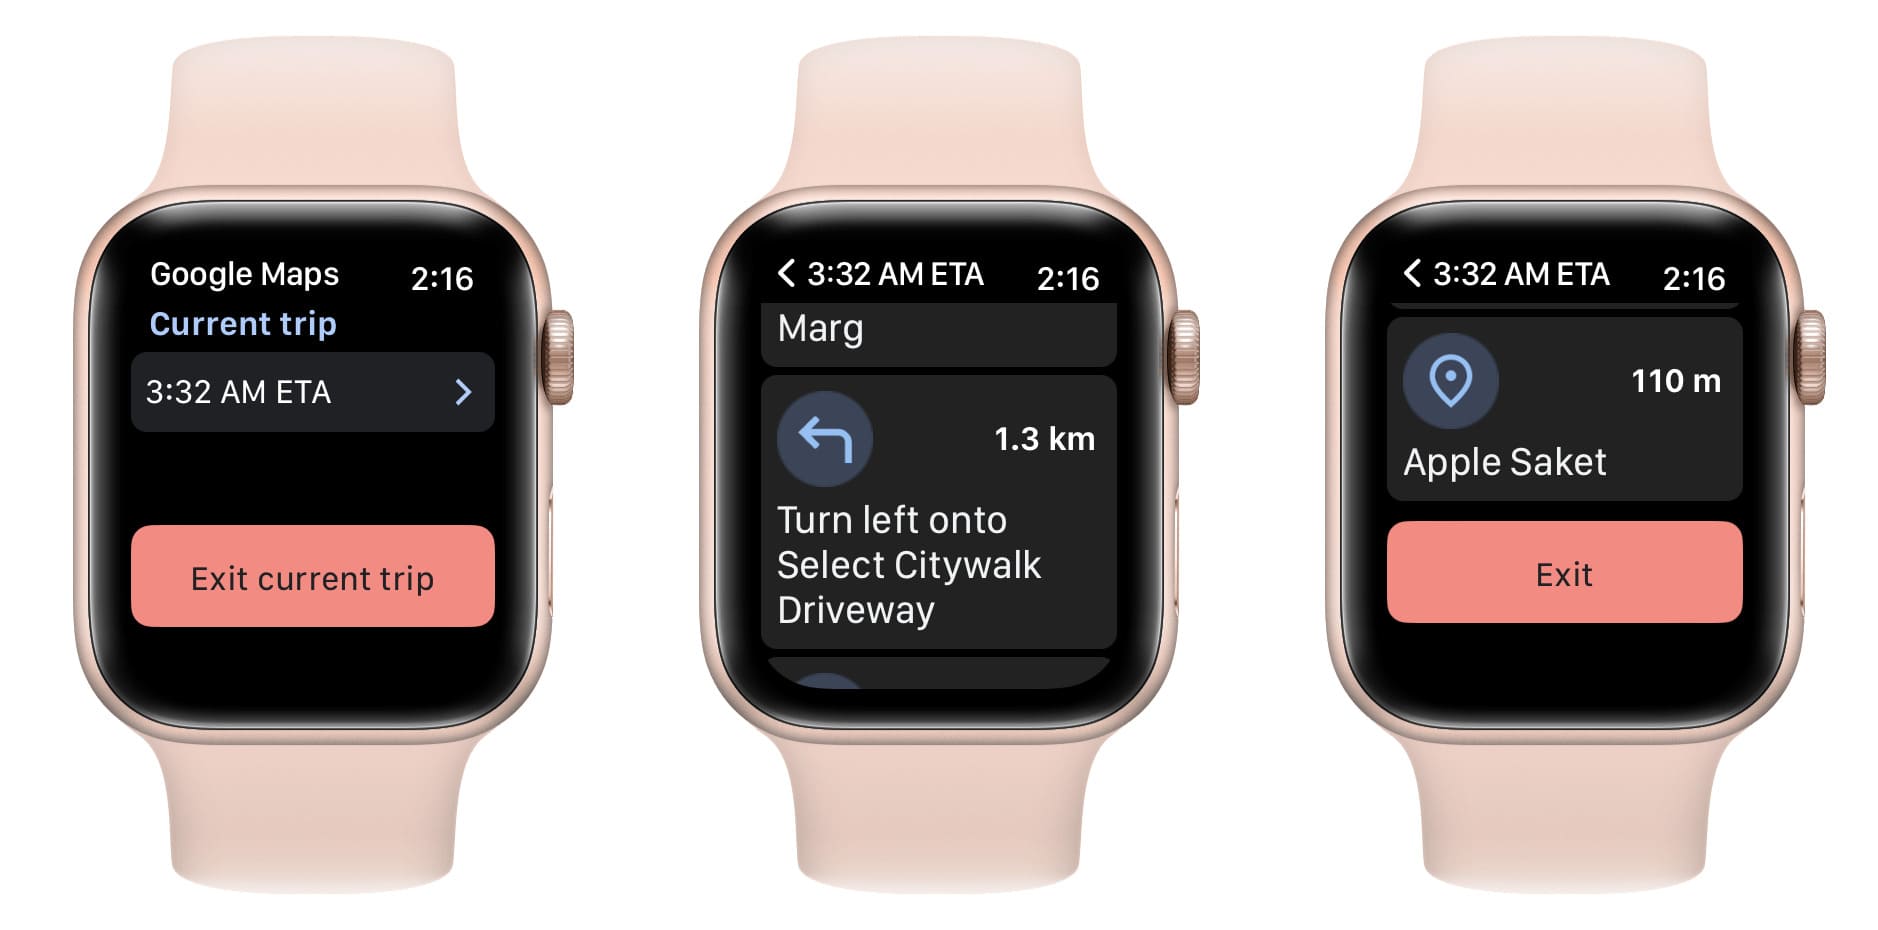 Getting navigation directions in Google Maps on Apple Watch